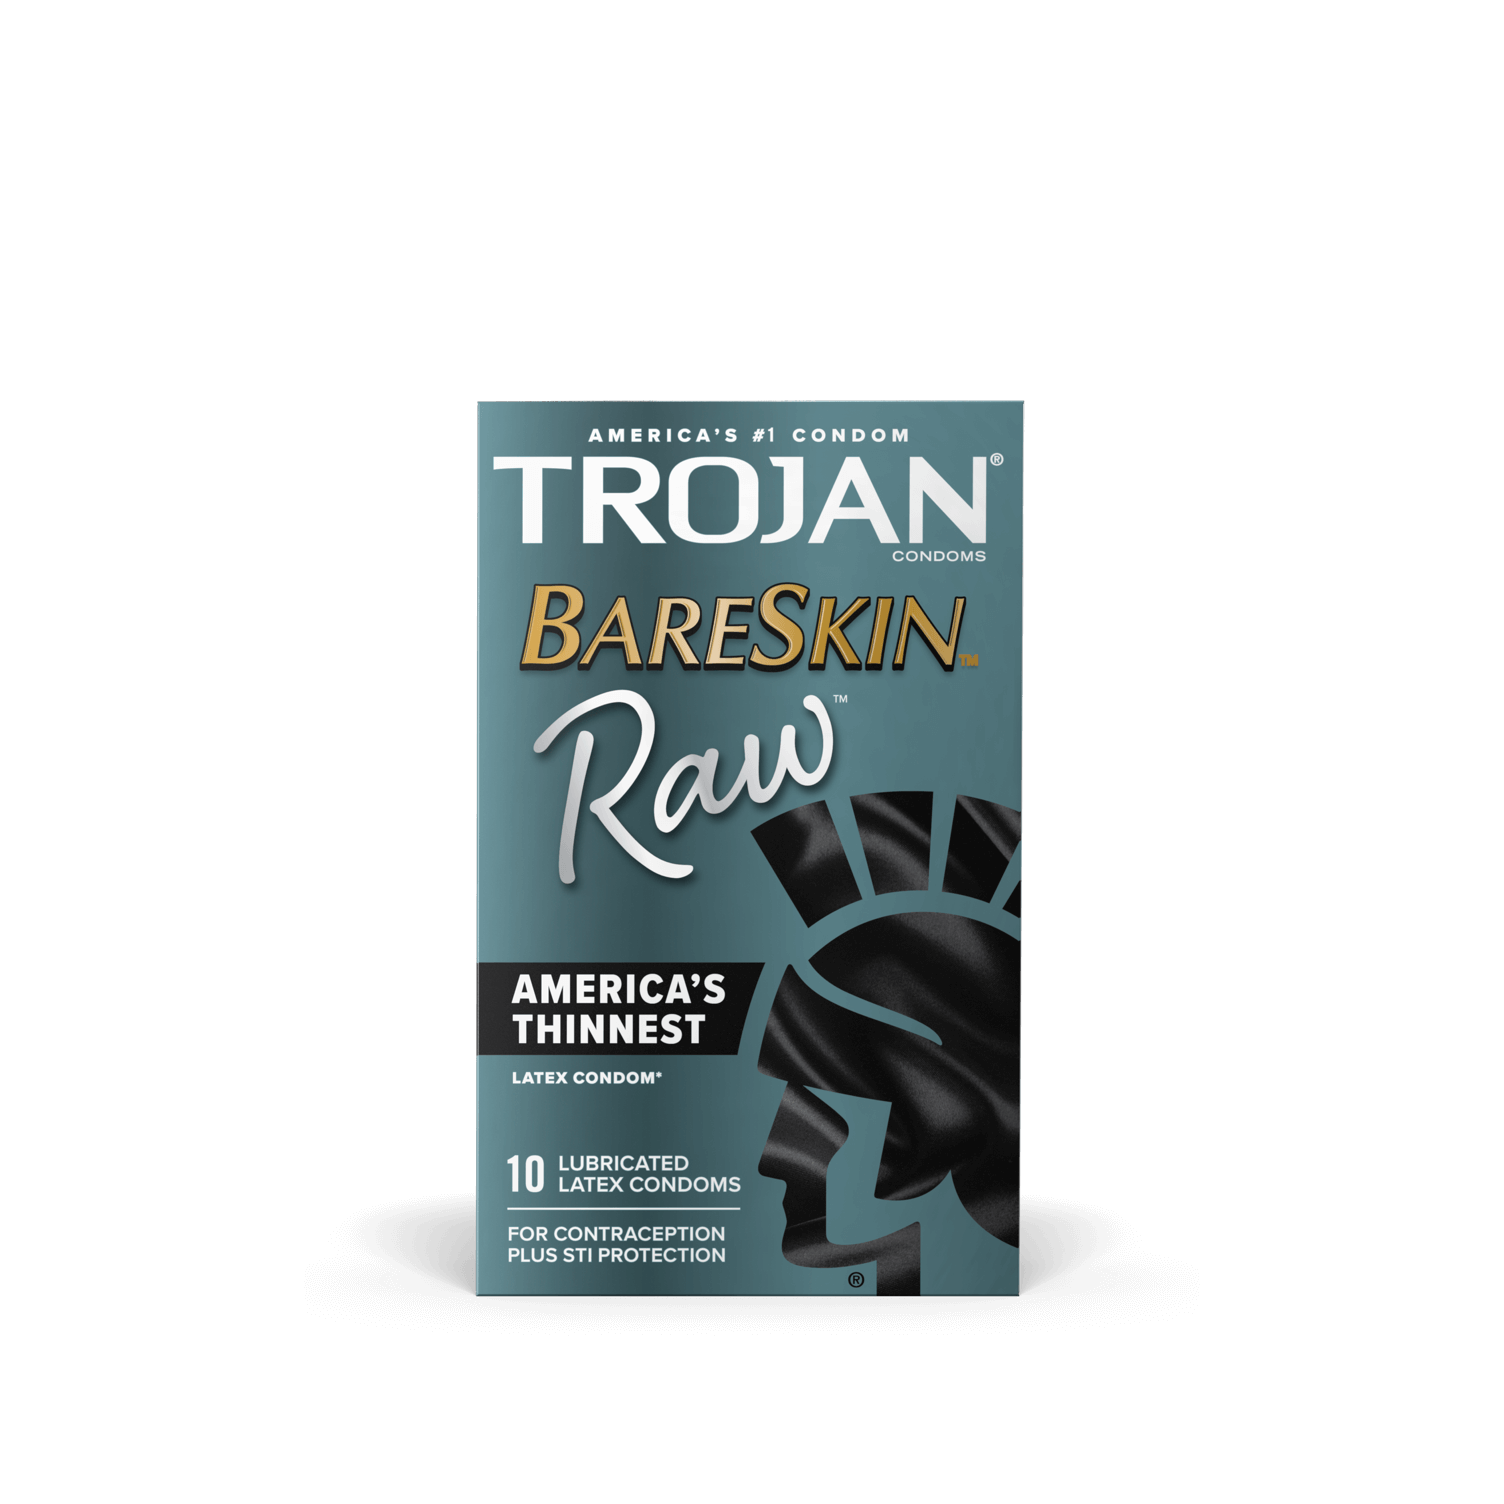 Trojan Ultra Thin Condoms - Reviews, Lubricated, Size